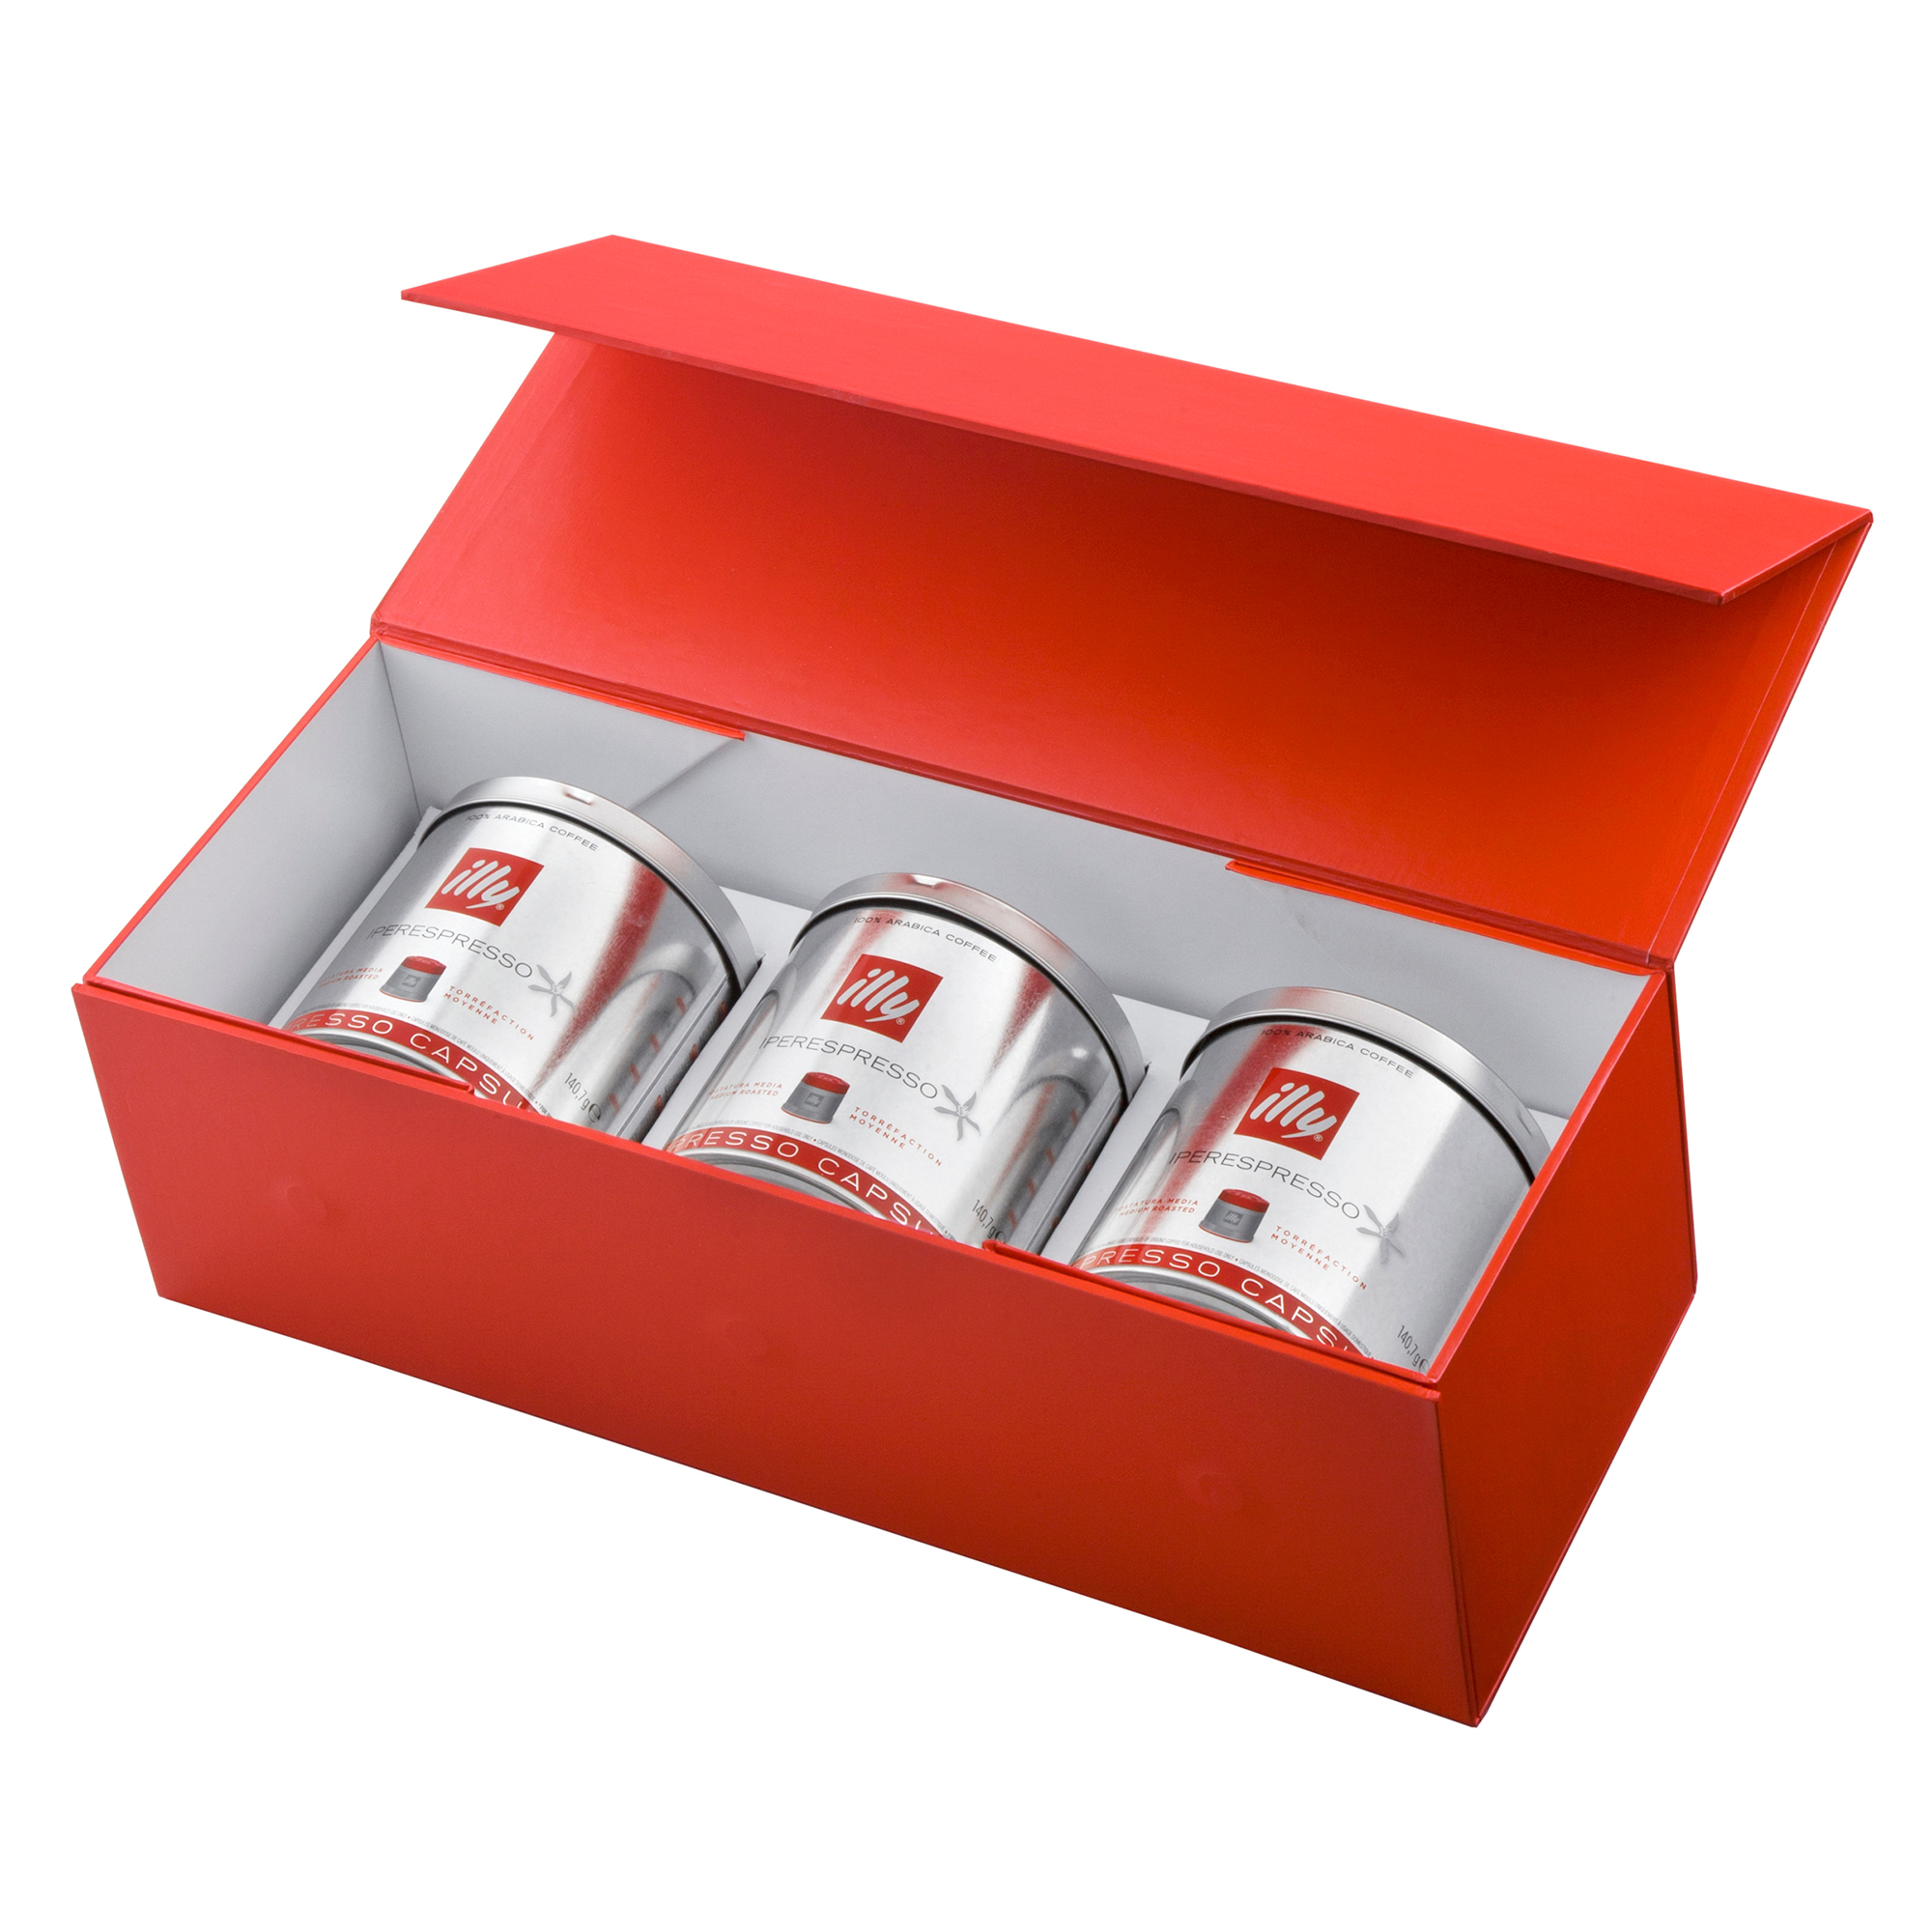 Customize a Gift Box of 3 illy Cans of Iperespresso Coffee